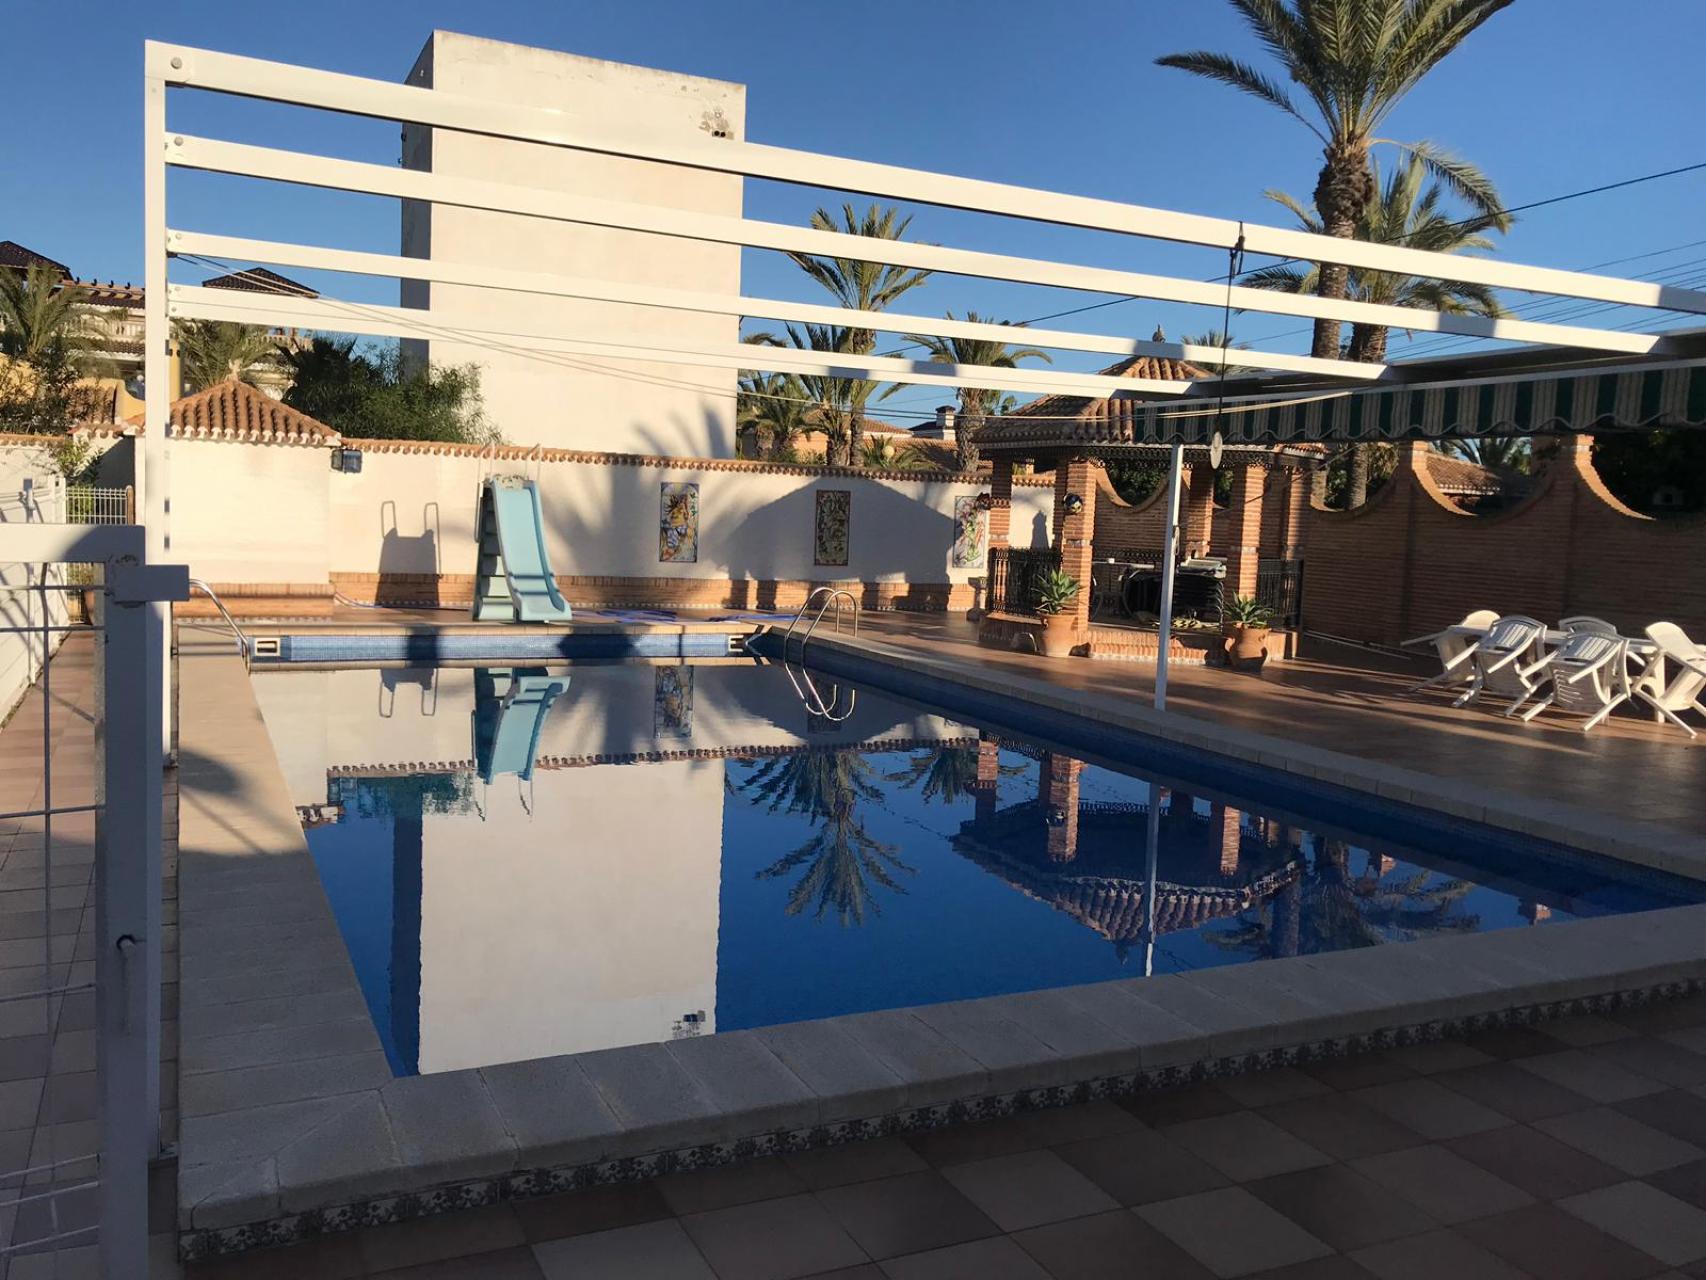 Cabo Roig, 545m2 villa on a 1500m2 plot 250m from the beach